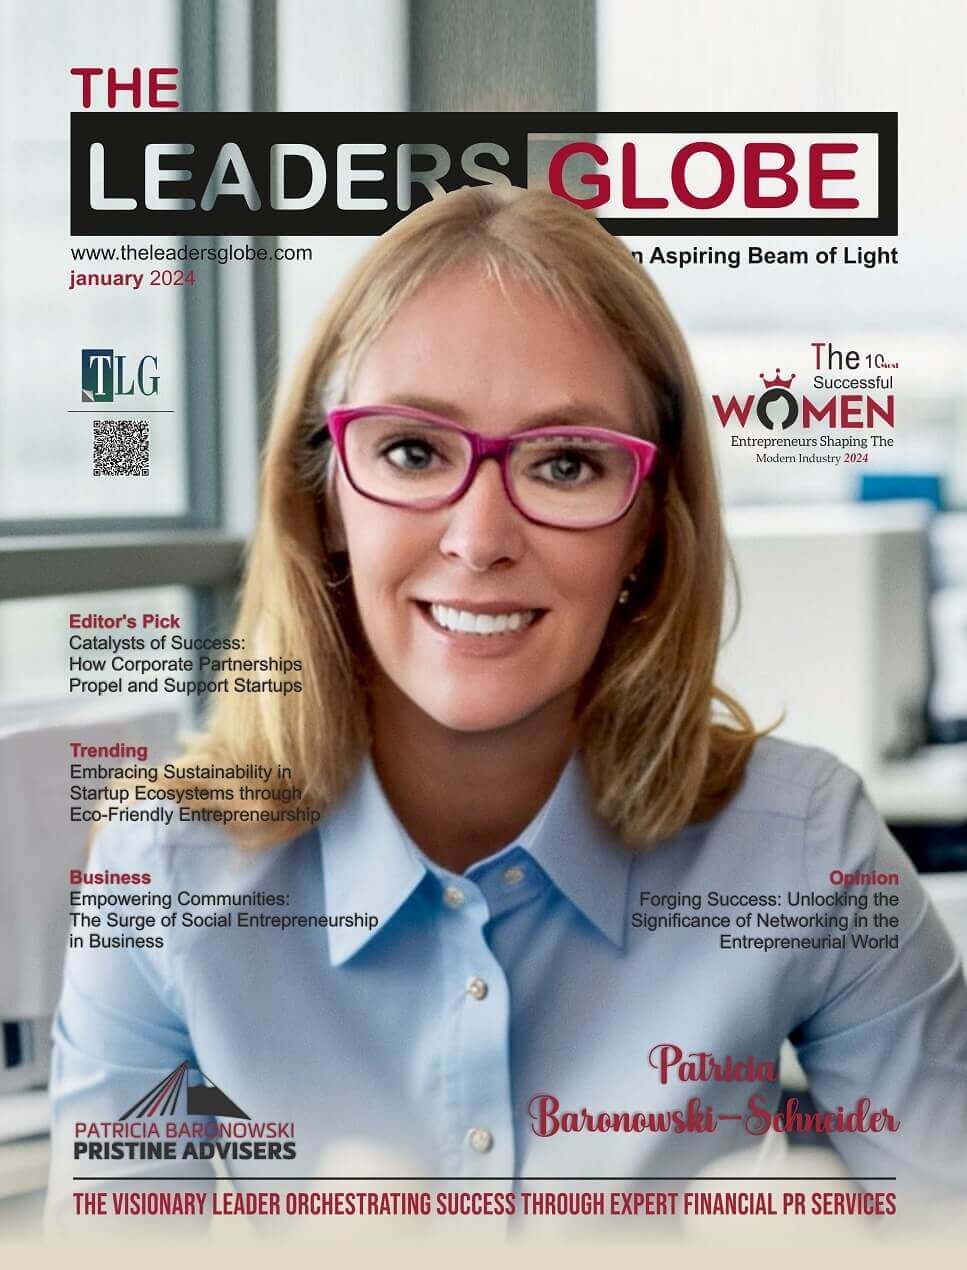 The 10 Most Successful Women Entrepreneurs Shaping the Modern Industry 2024- Patricia Cover Page